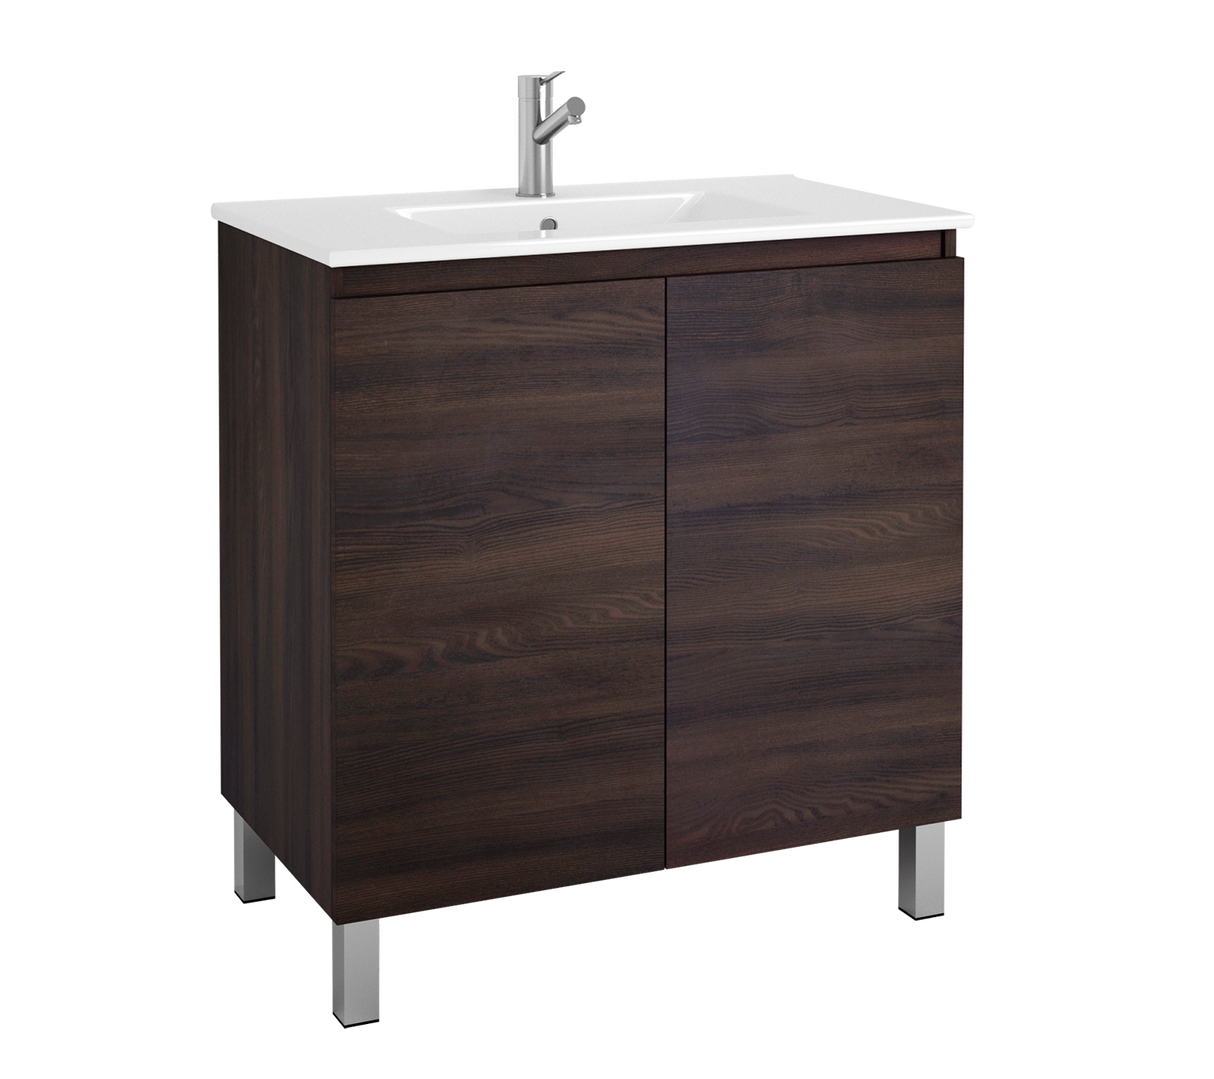 DAX Sunset Engineered Wood and Porcelain Onix Basin with Vanity, 32", Wenge DAX-SUN013213-ONX